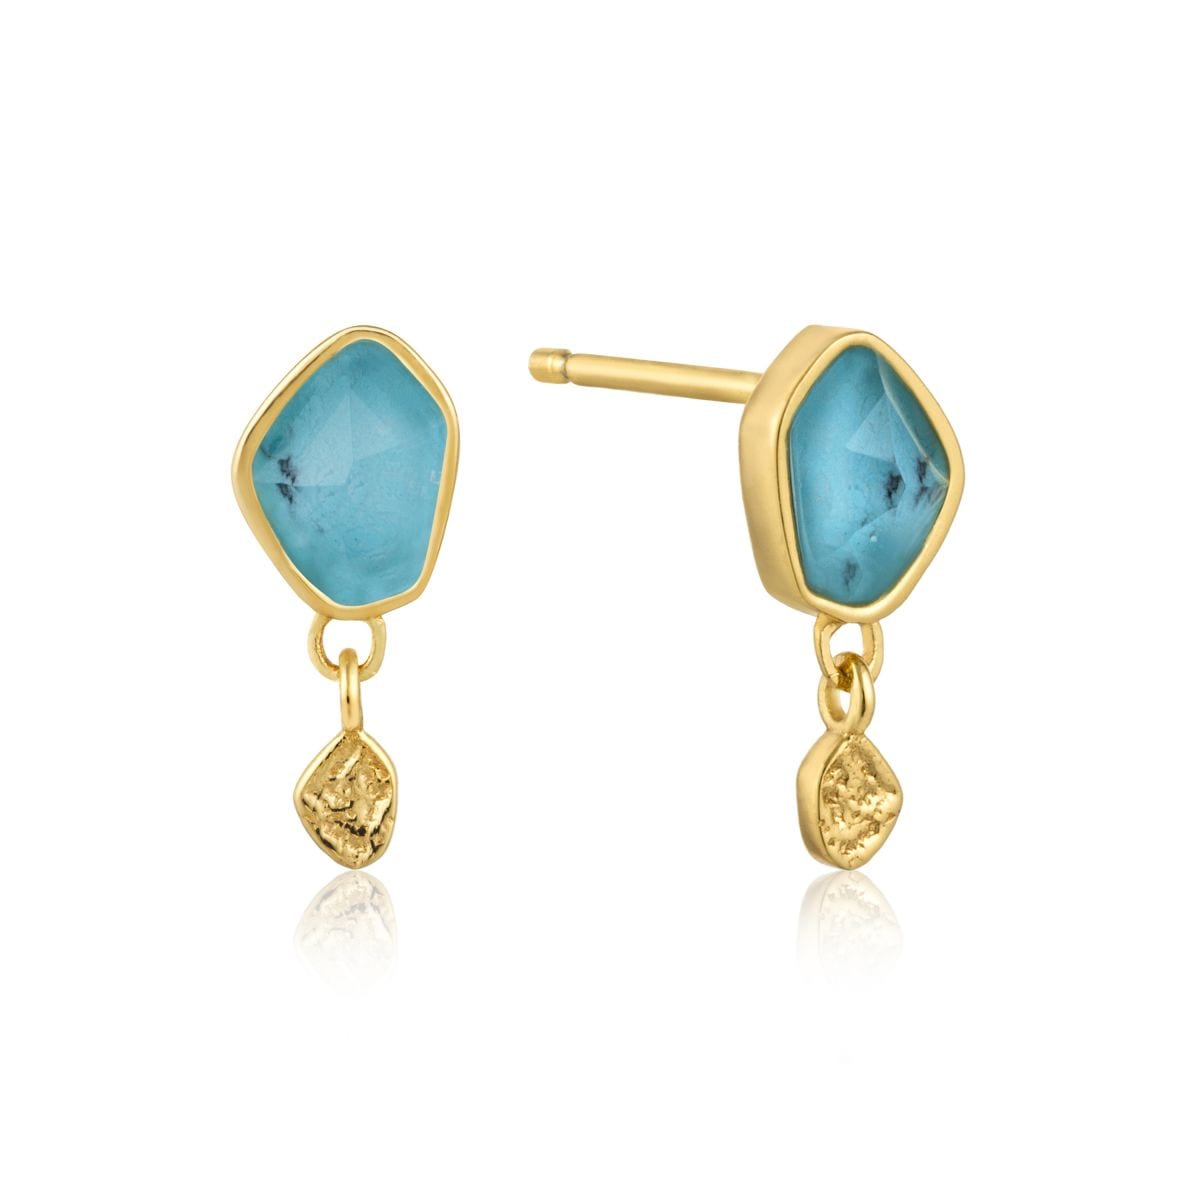 Turquoise Drop Stud Earrings by Ania Haie - Nelson Coleman Jewelers